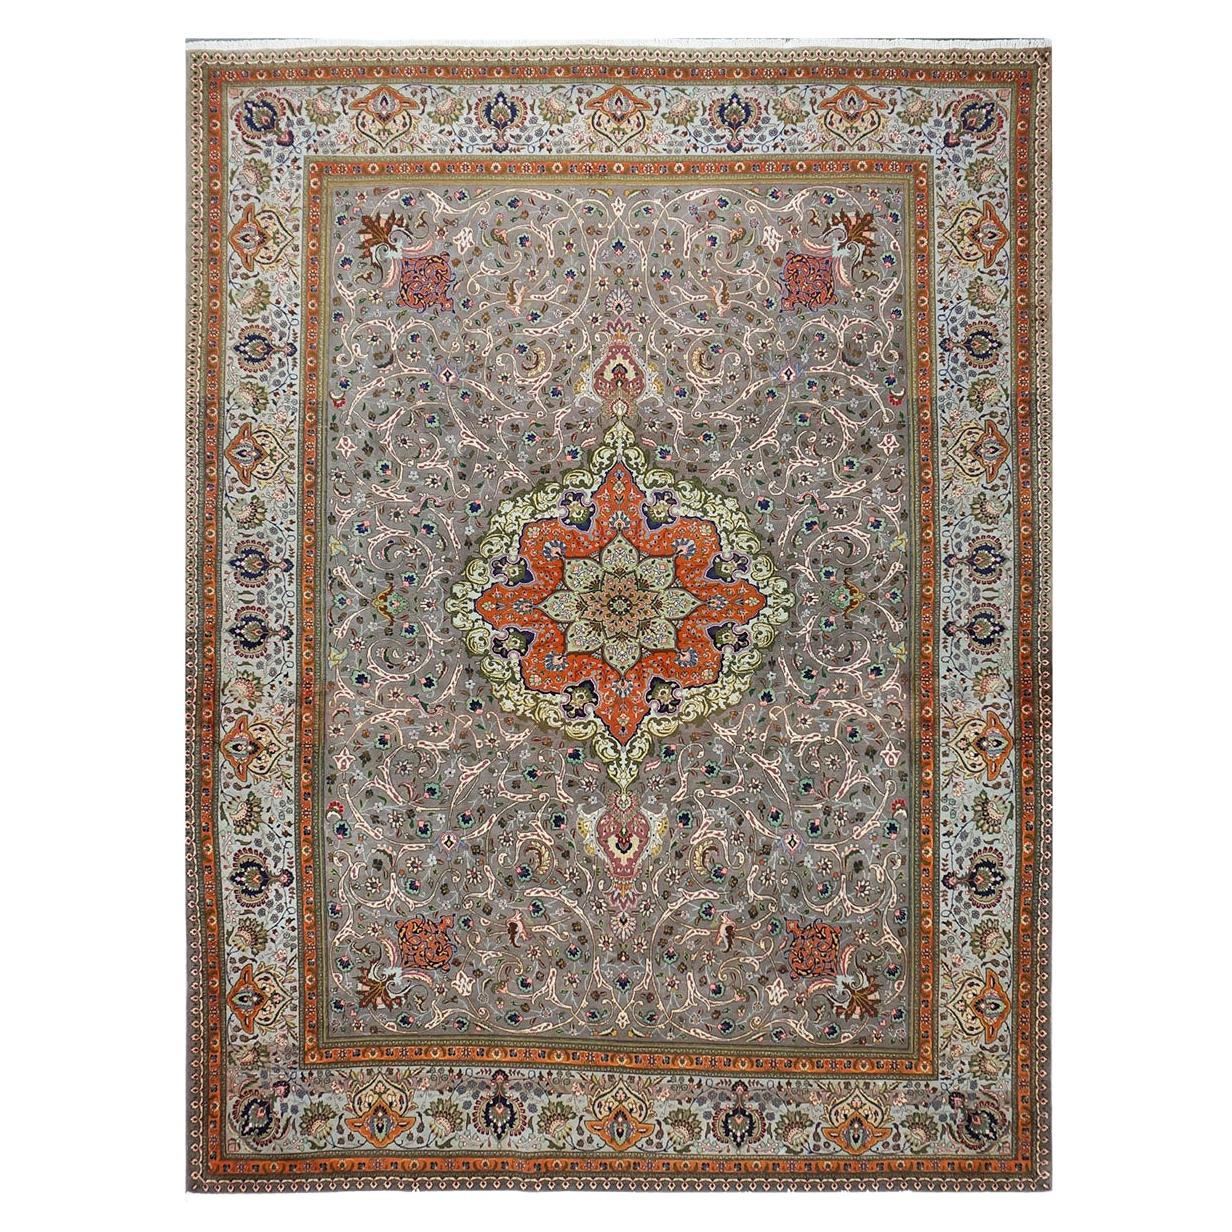 20th Century Persian Wool Tabriz 10x13 Rug Grey and Light Blue Border For Sale